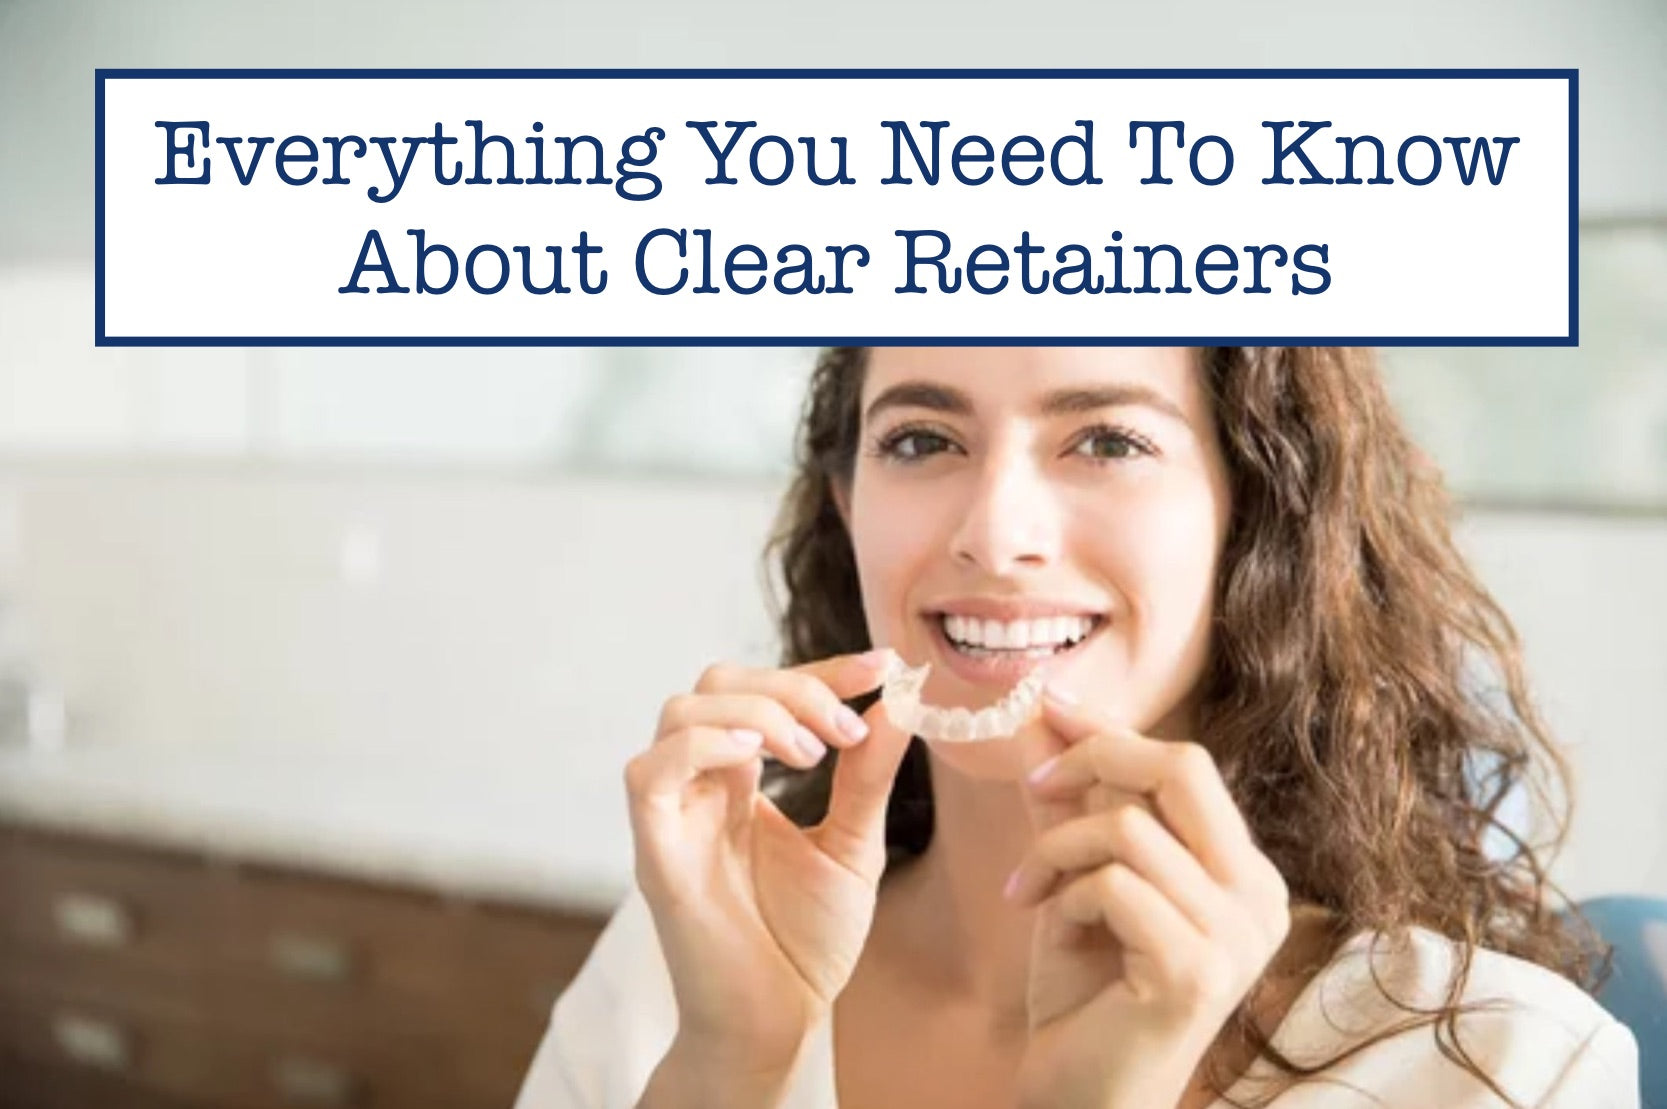 Everything You Need To Know About Clear Retainers: Benefits, Care And More